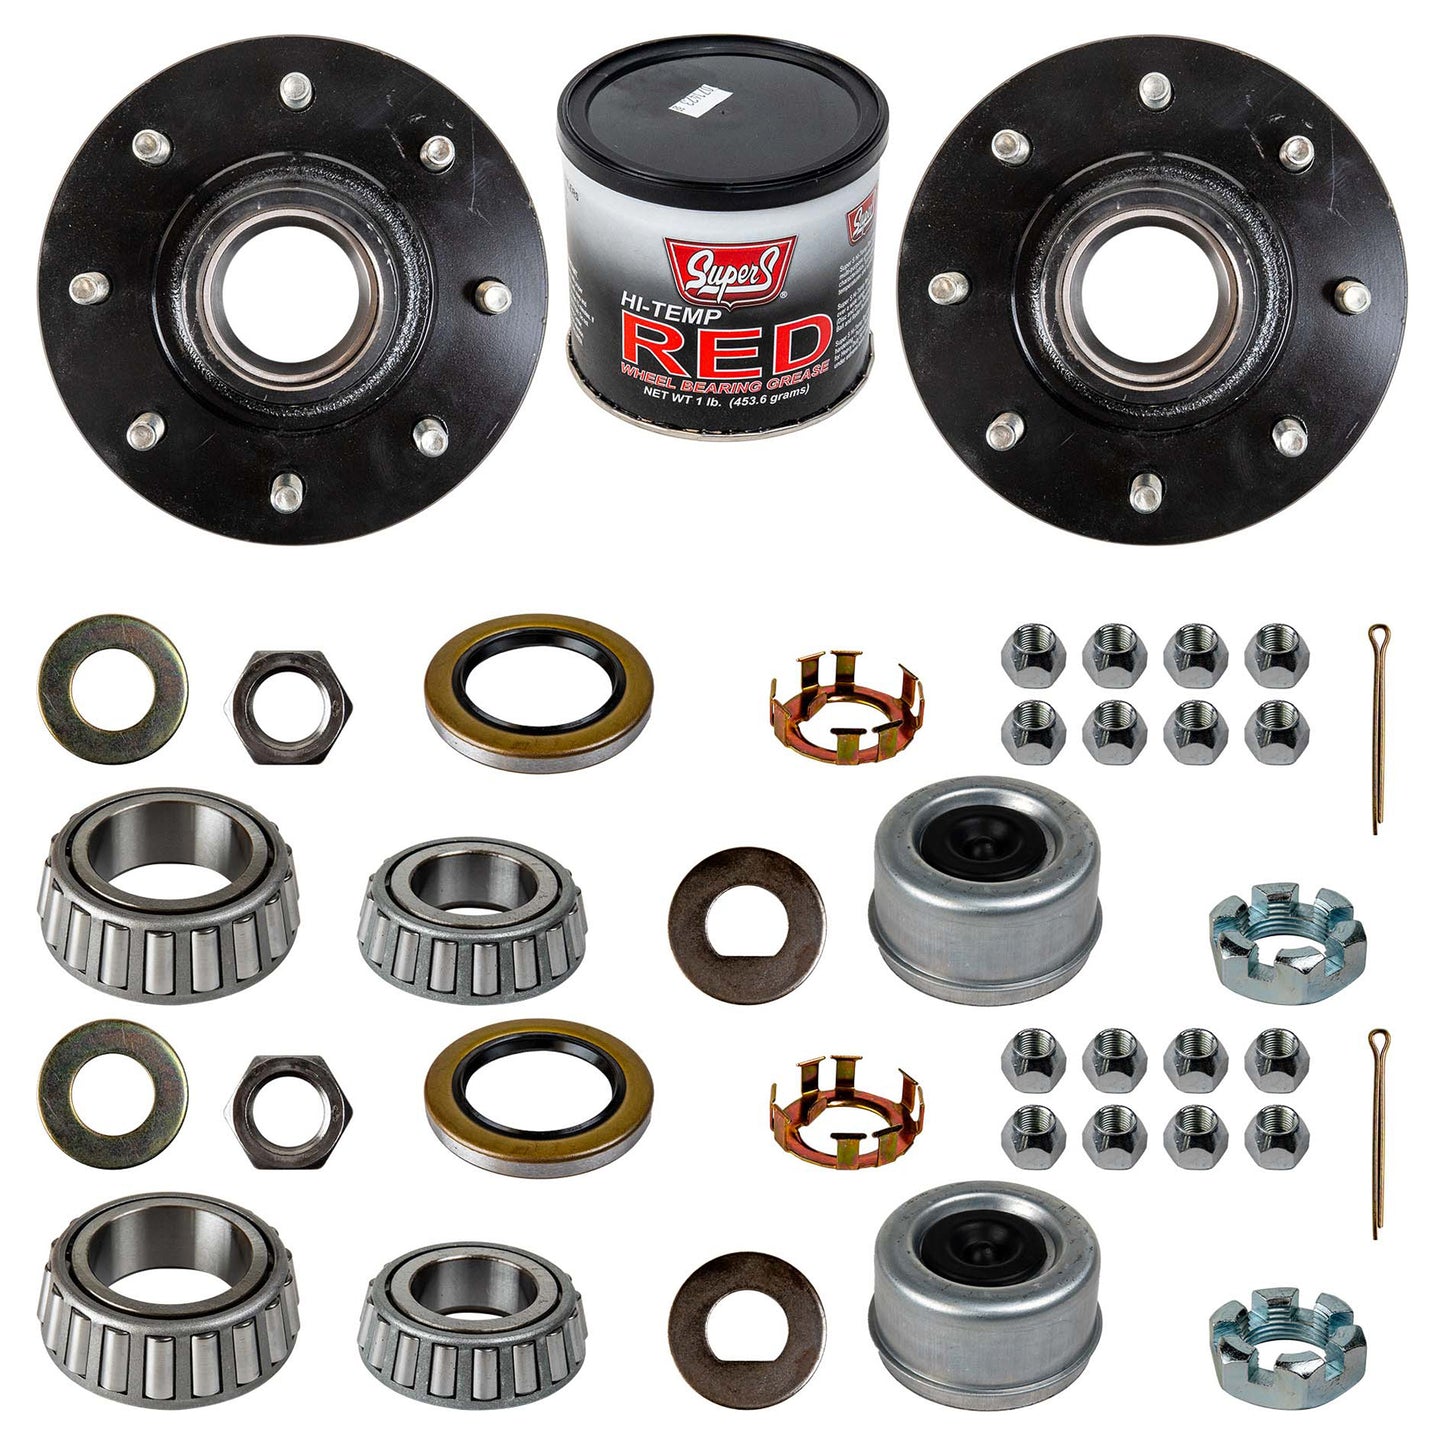 7000 lb Trailer Idler Axle TK Service Kit - 7k Capacity - The Trailer Parts Outlet